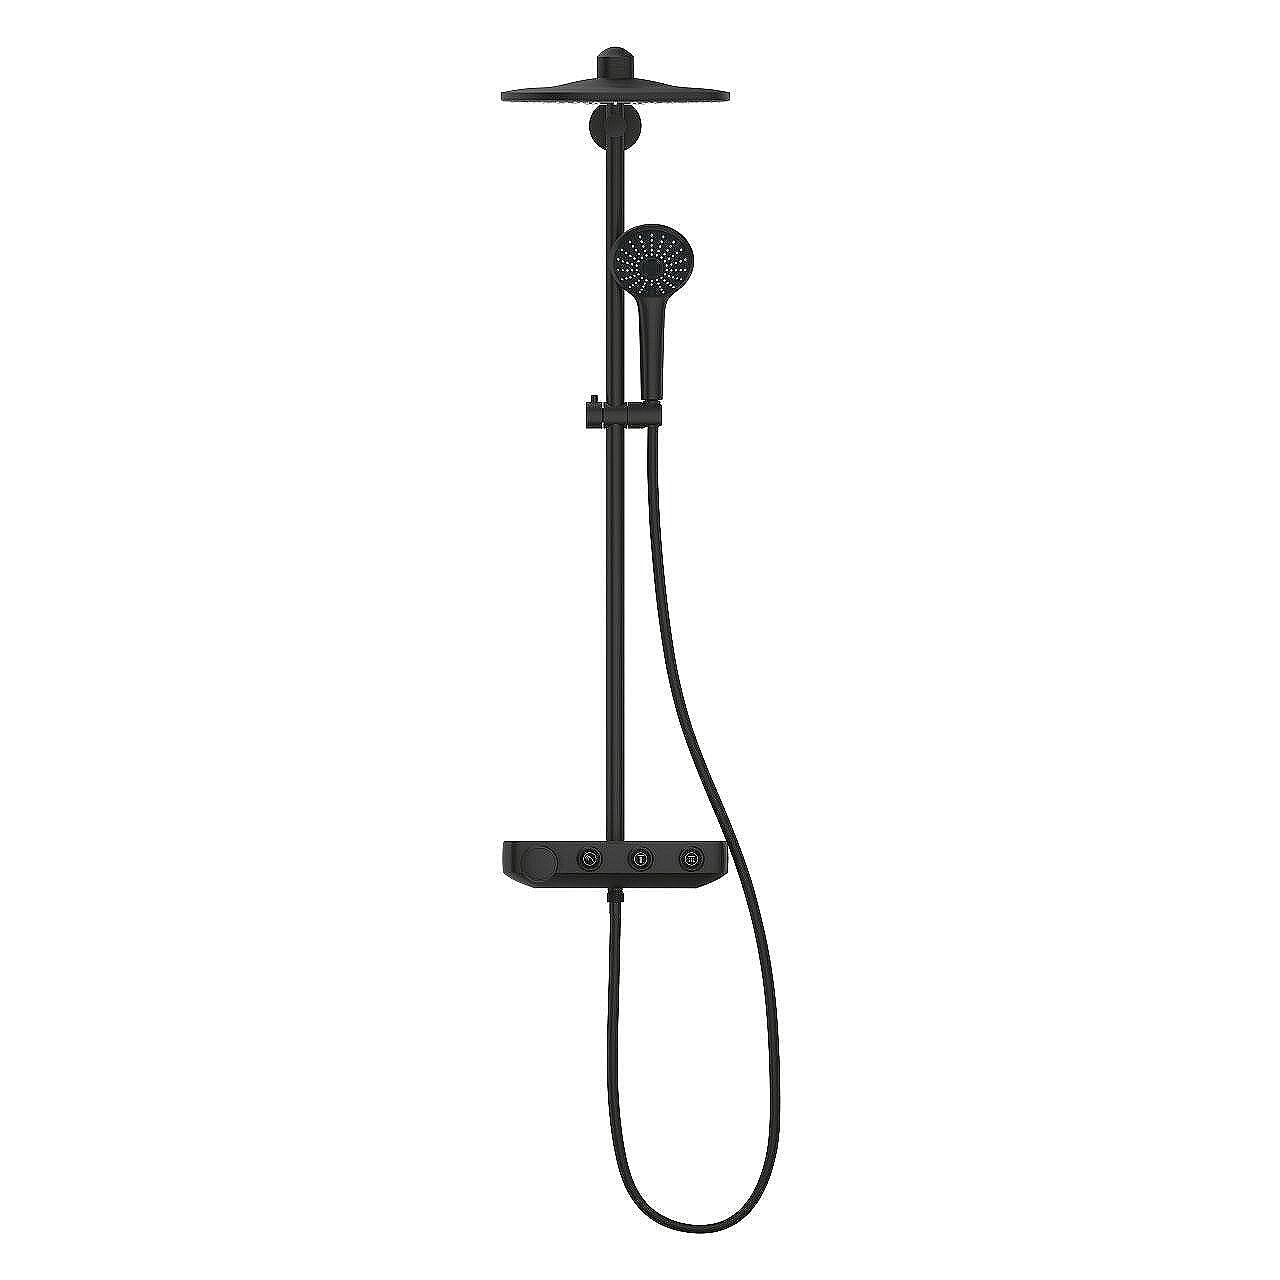 Душ система с термостат, черен мат GROHE Euphoria SmartControl System 310 Duo https://www.grohe.is/en_is/shower-system-with-thermostat-for-wall-mounting-22120KF0.html